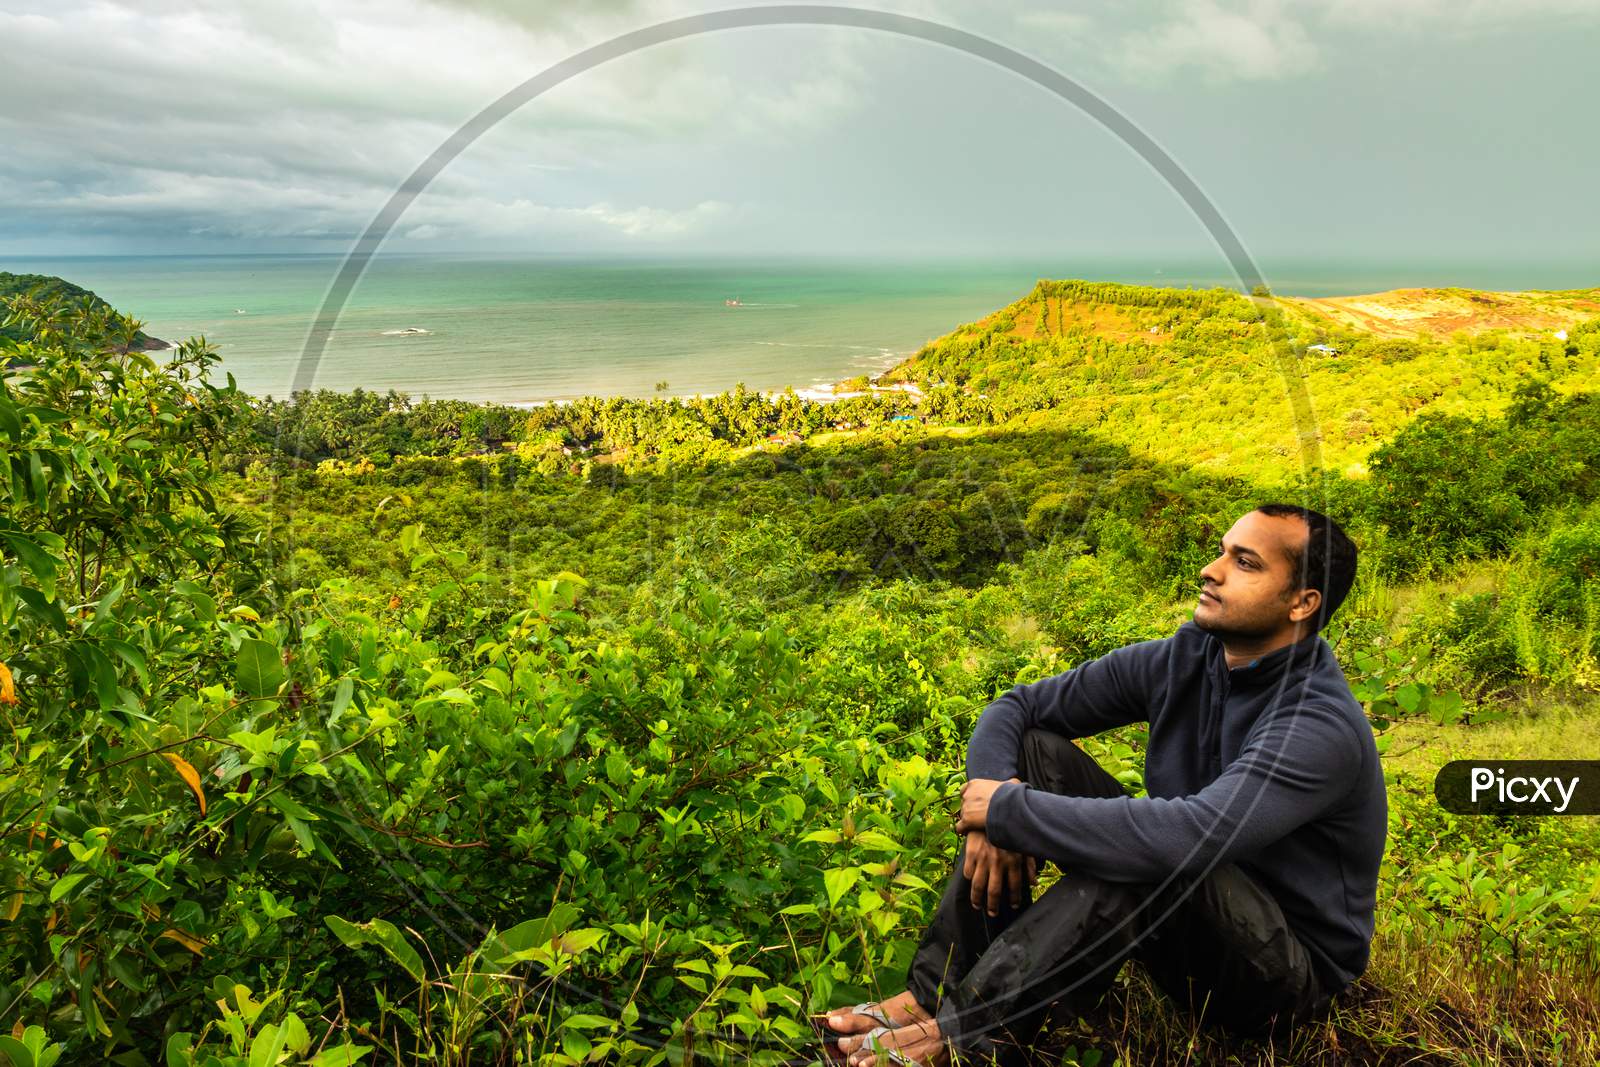 Man Sitting At Hilltop With Landscape Serene View And Dense Green Forests